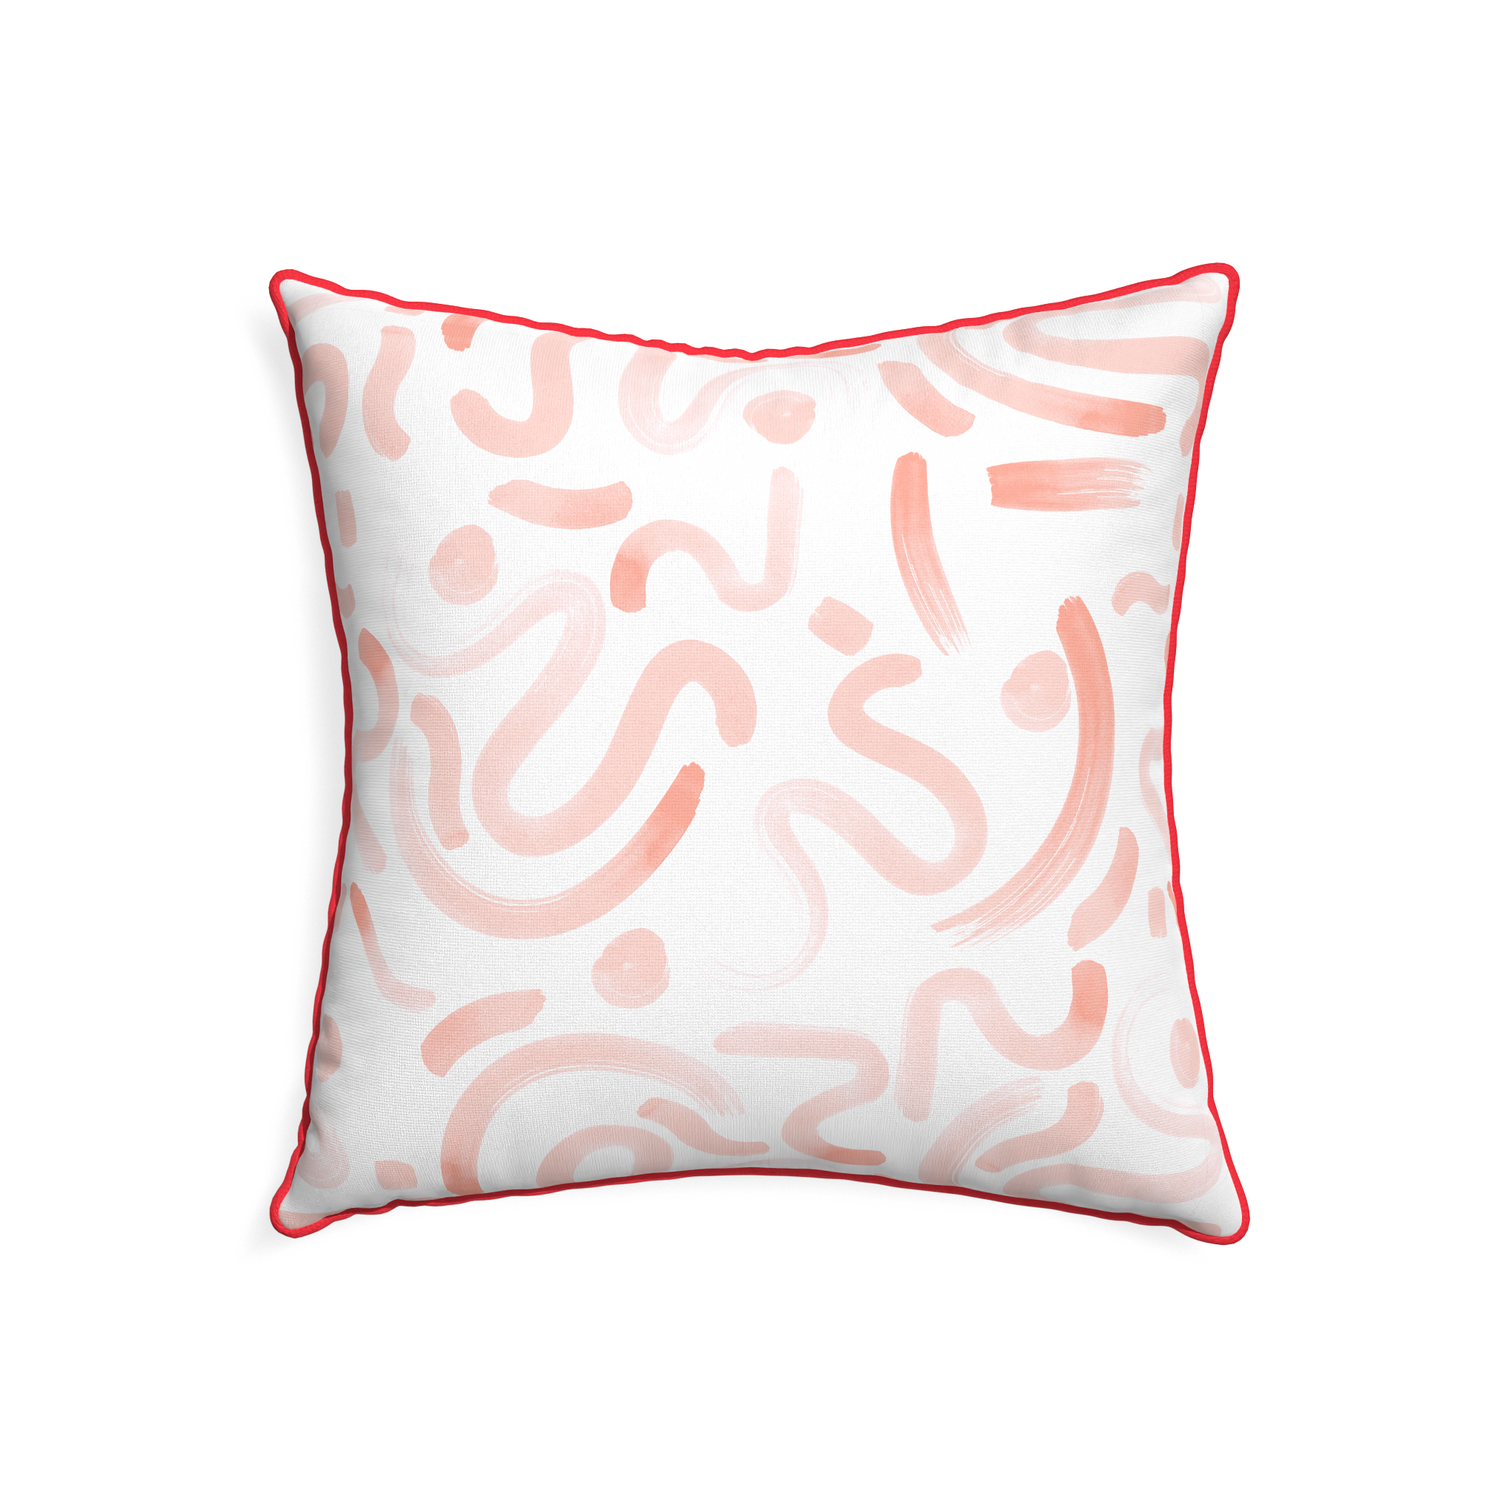 22-square hockney pink custom pillow with cherry piping on white background